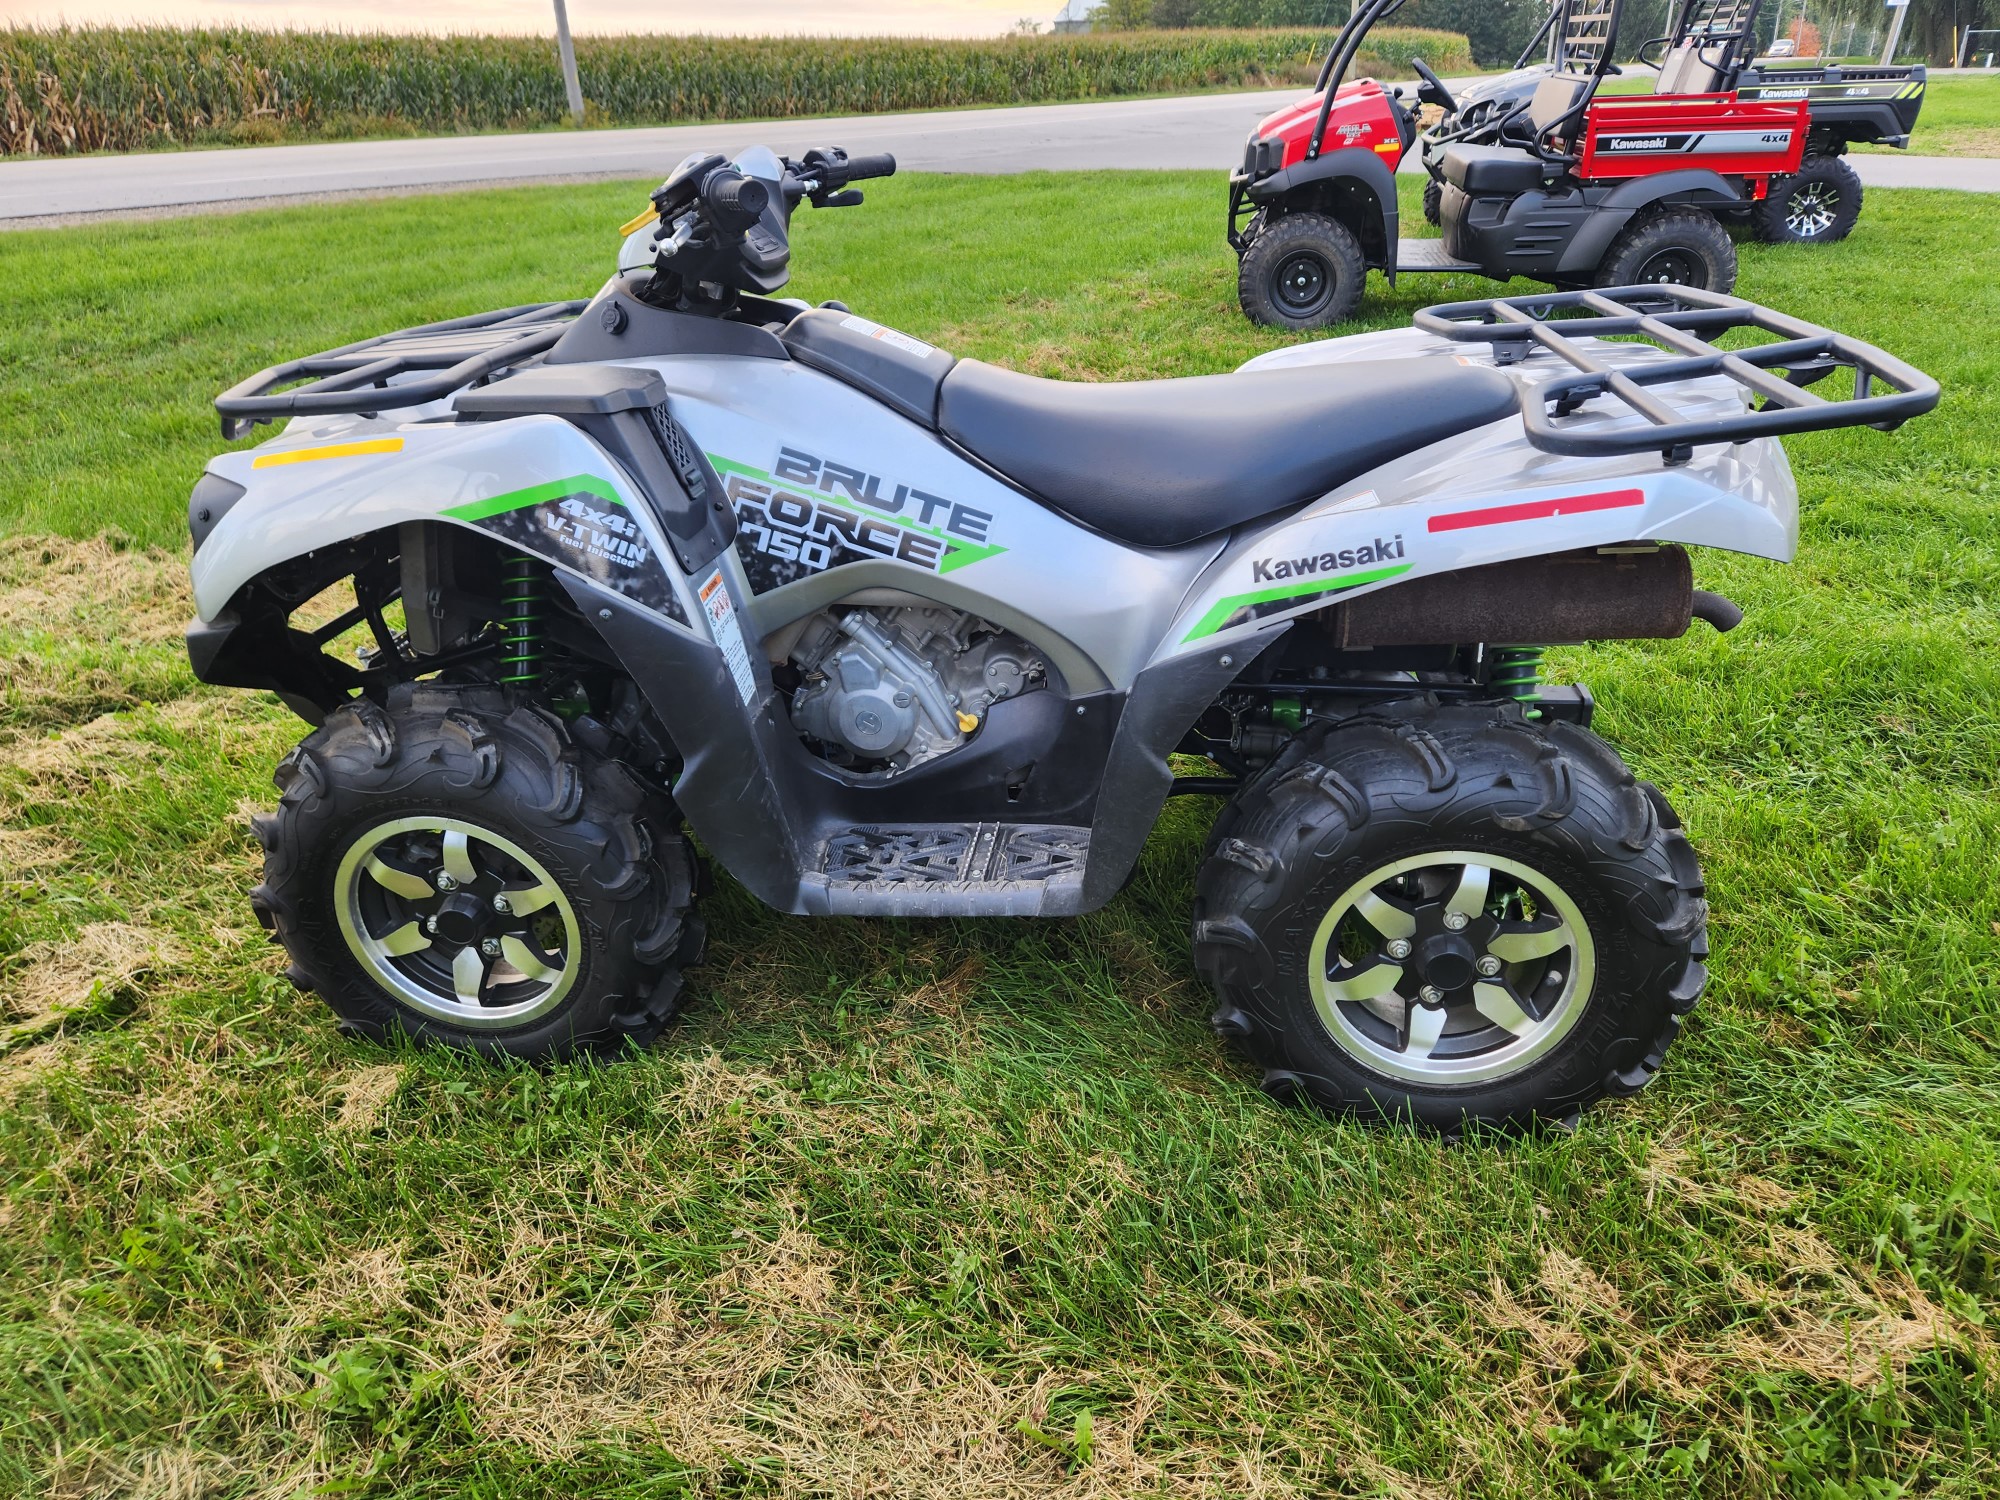 2019 Brute Force 750 4x4i EPS SE Brute Force 750 4x4i EPS SE  - Click for larger photo